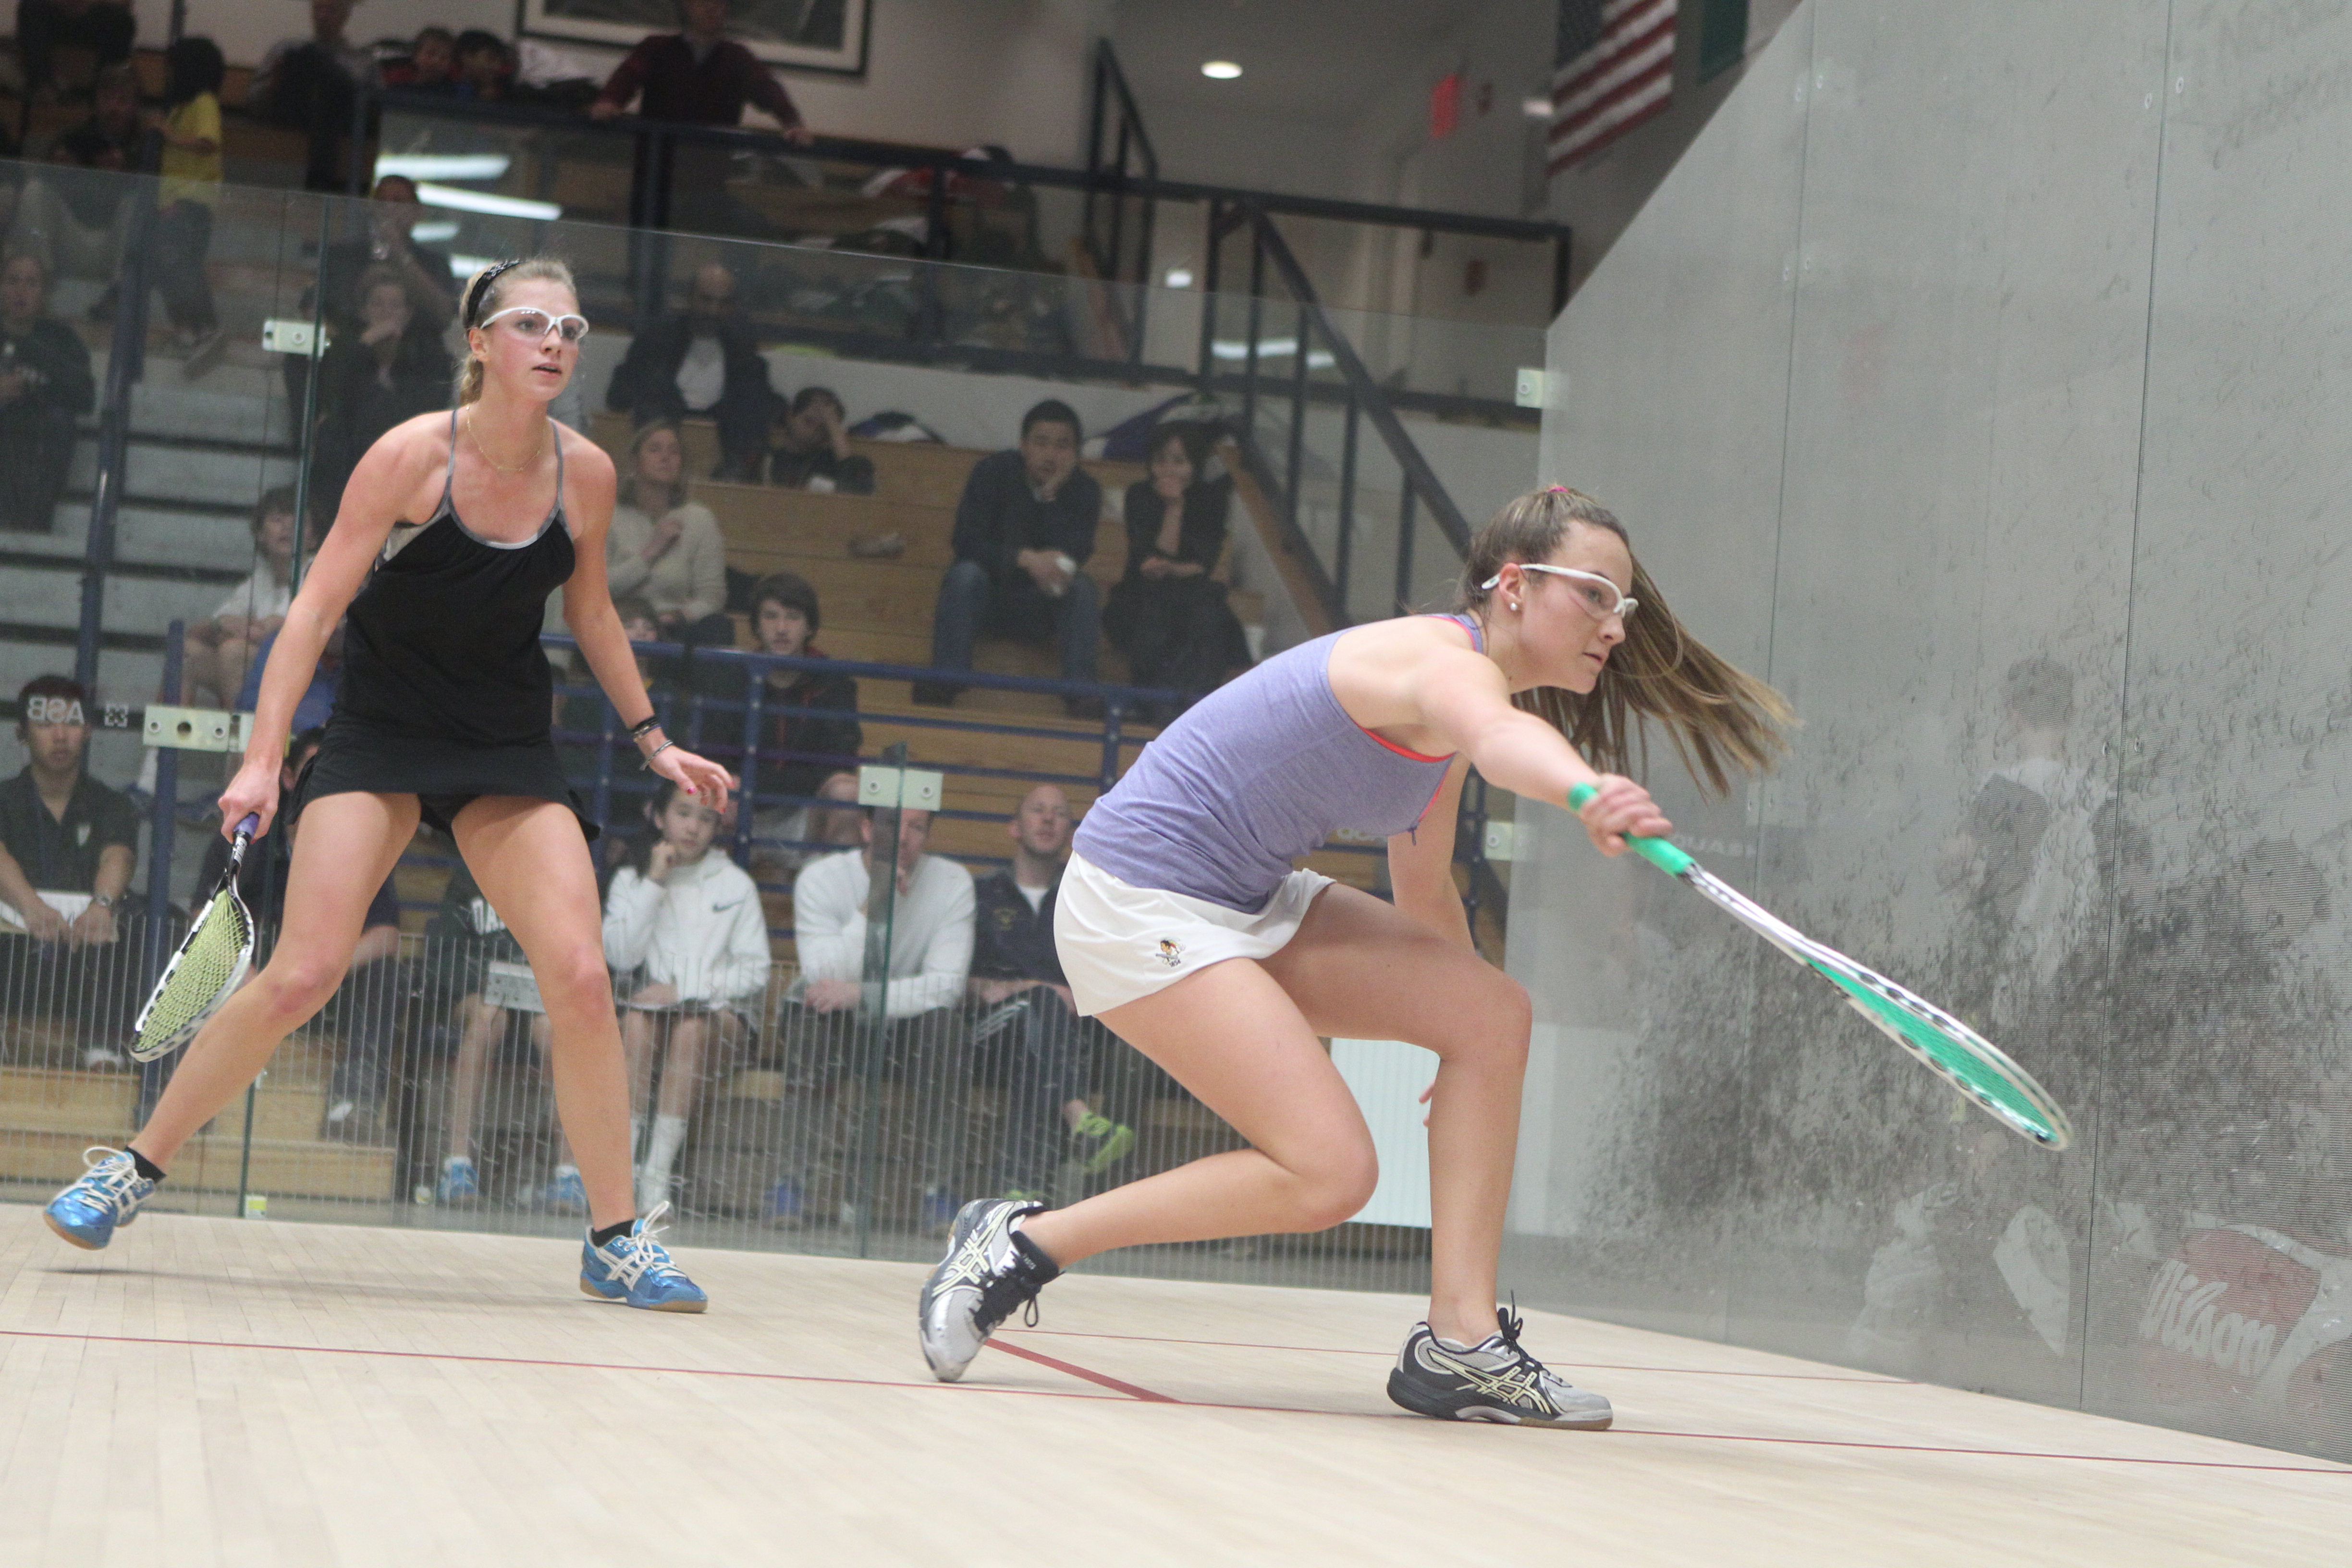  Olivia Fiechter swept her way to the U17 championship, giving her two U.S. titles (she won the U15 in 2010).